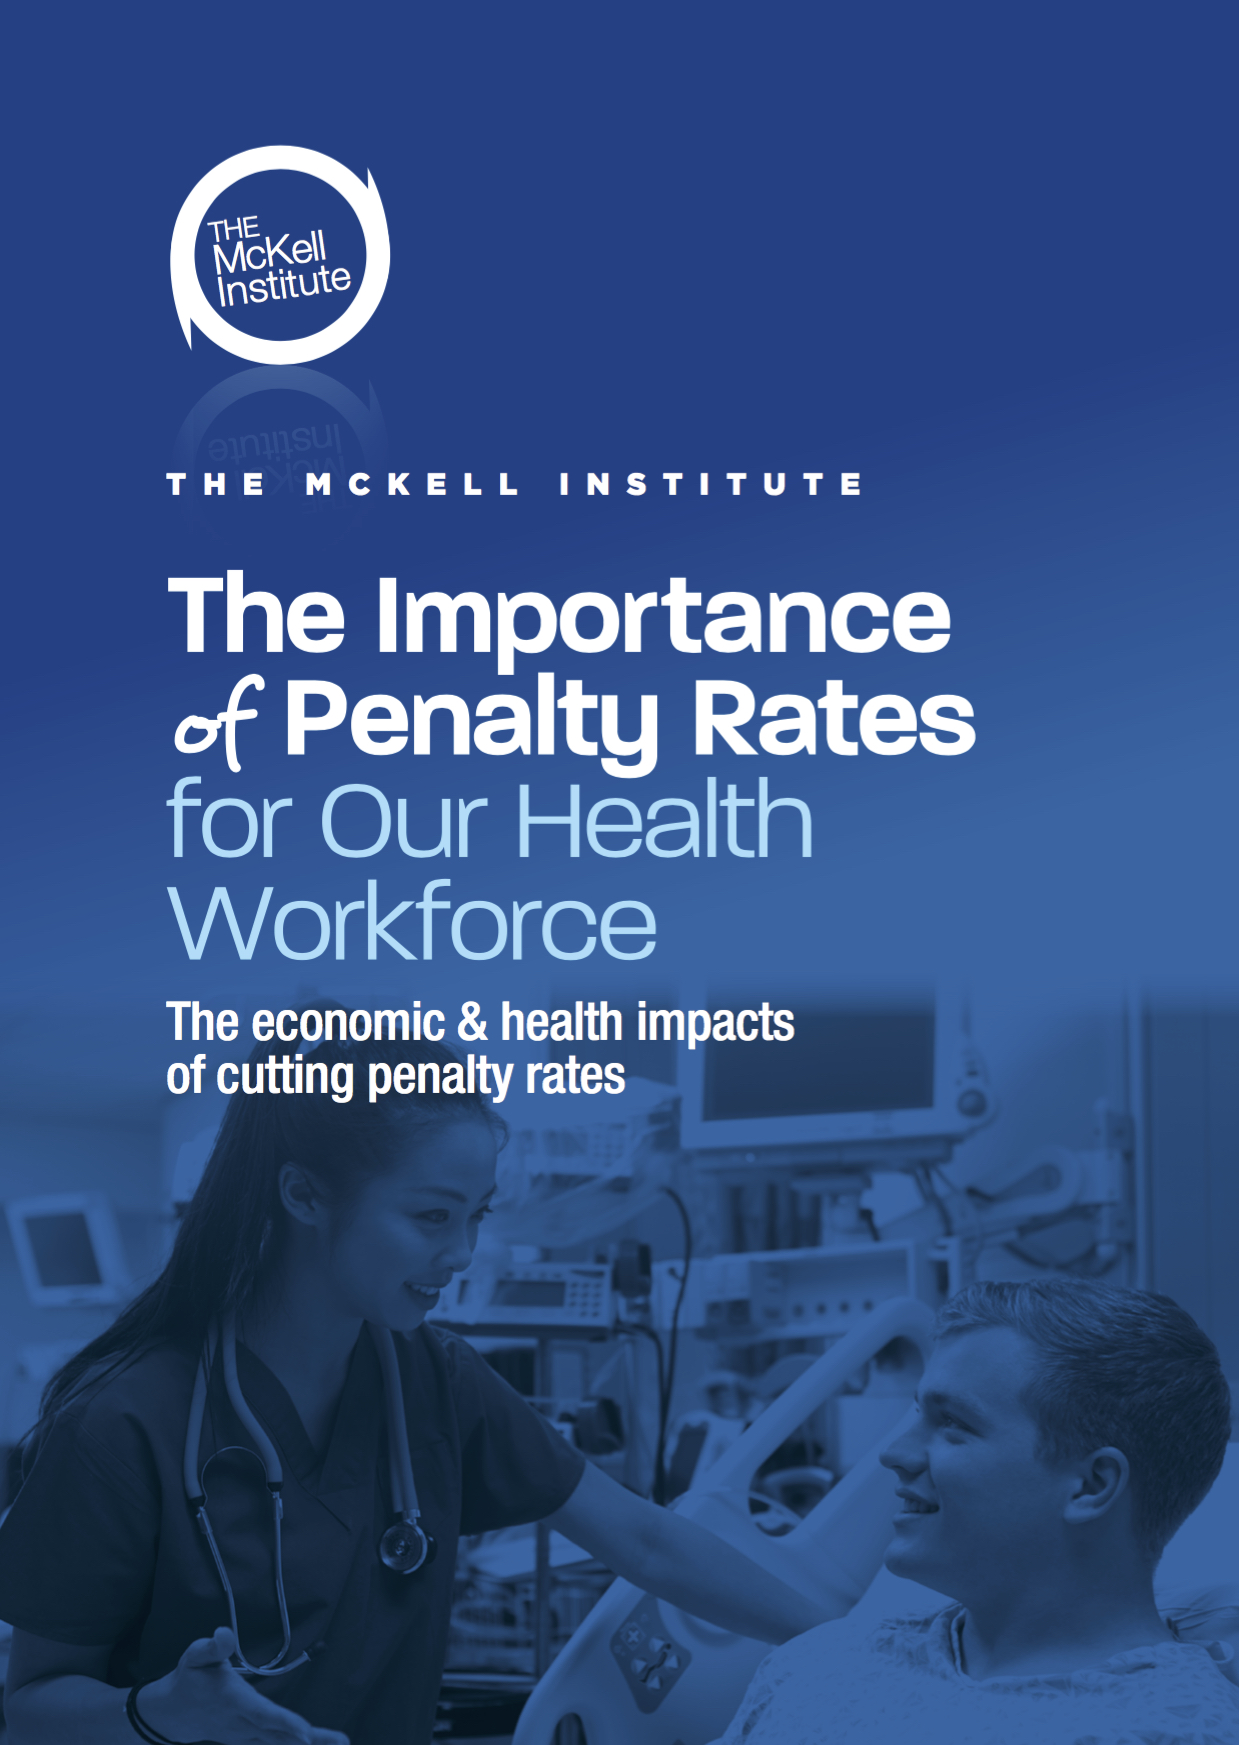 The Importance of Penalty Rates for Our Health Workforce The McKell